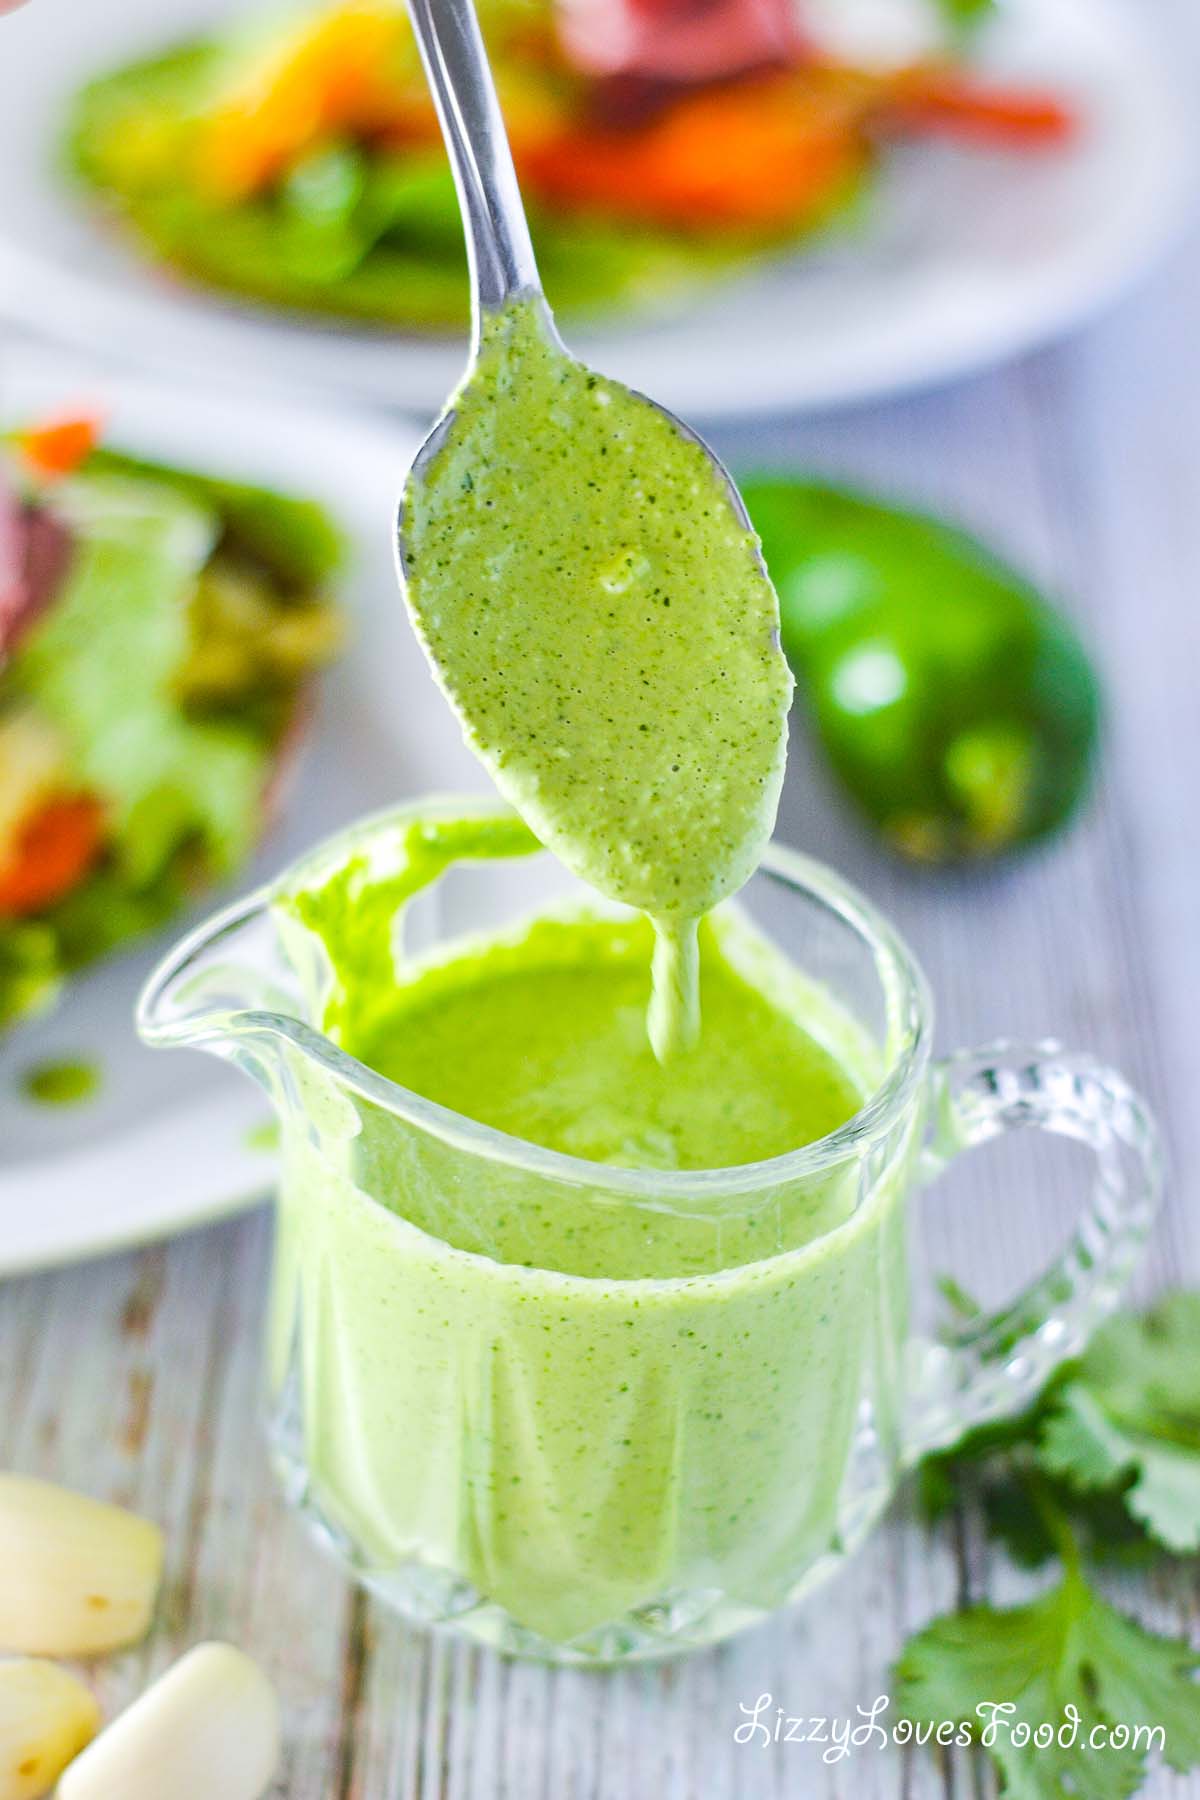 Peruvian Green Sauce with a dipped spoon